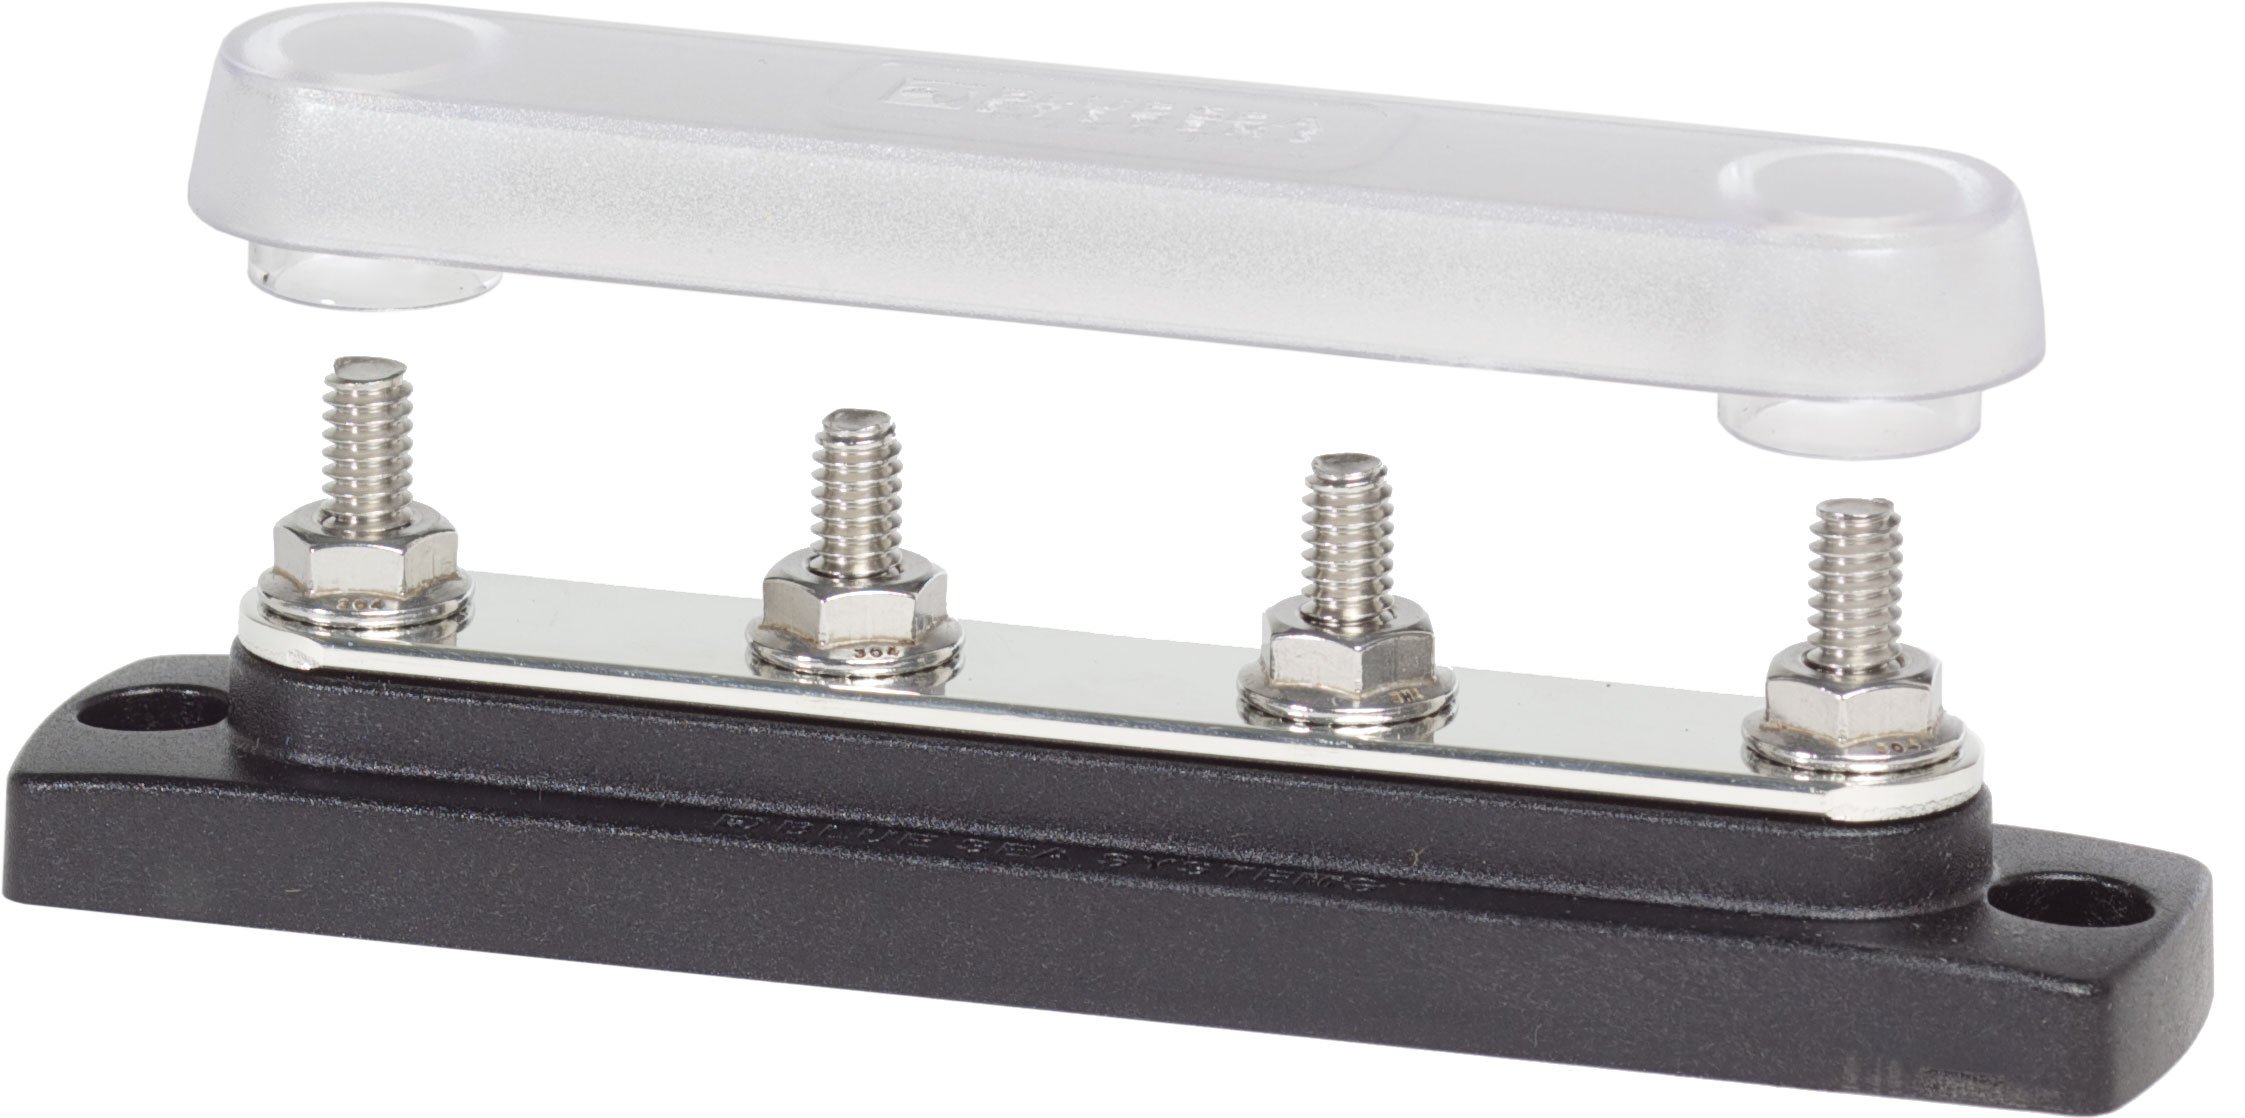 Blue Sea Systems 2307 150 Amp Common BusBar with 4 studs and a cover, With Cover, 150A